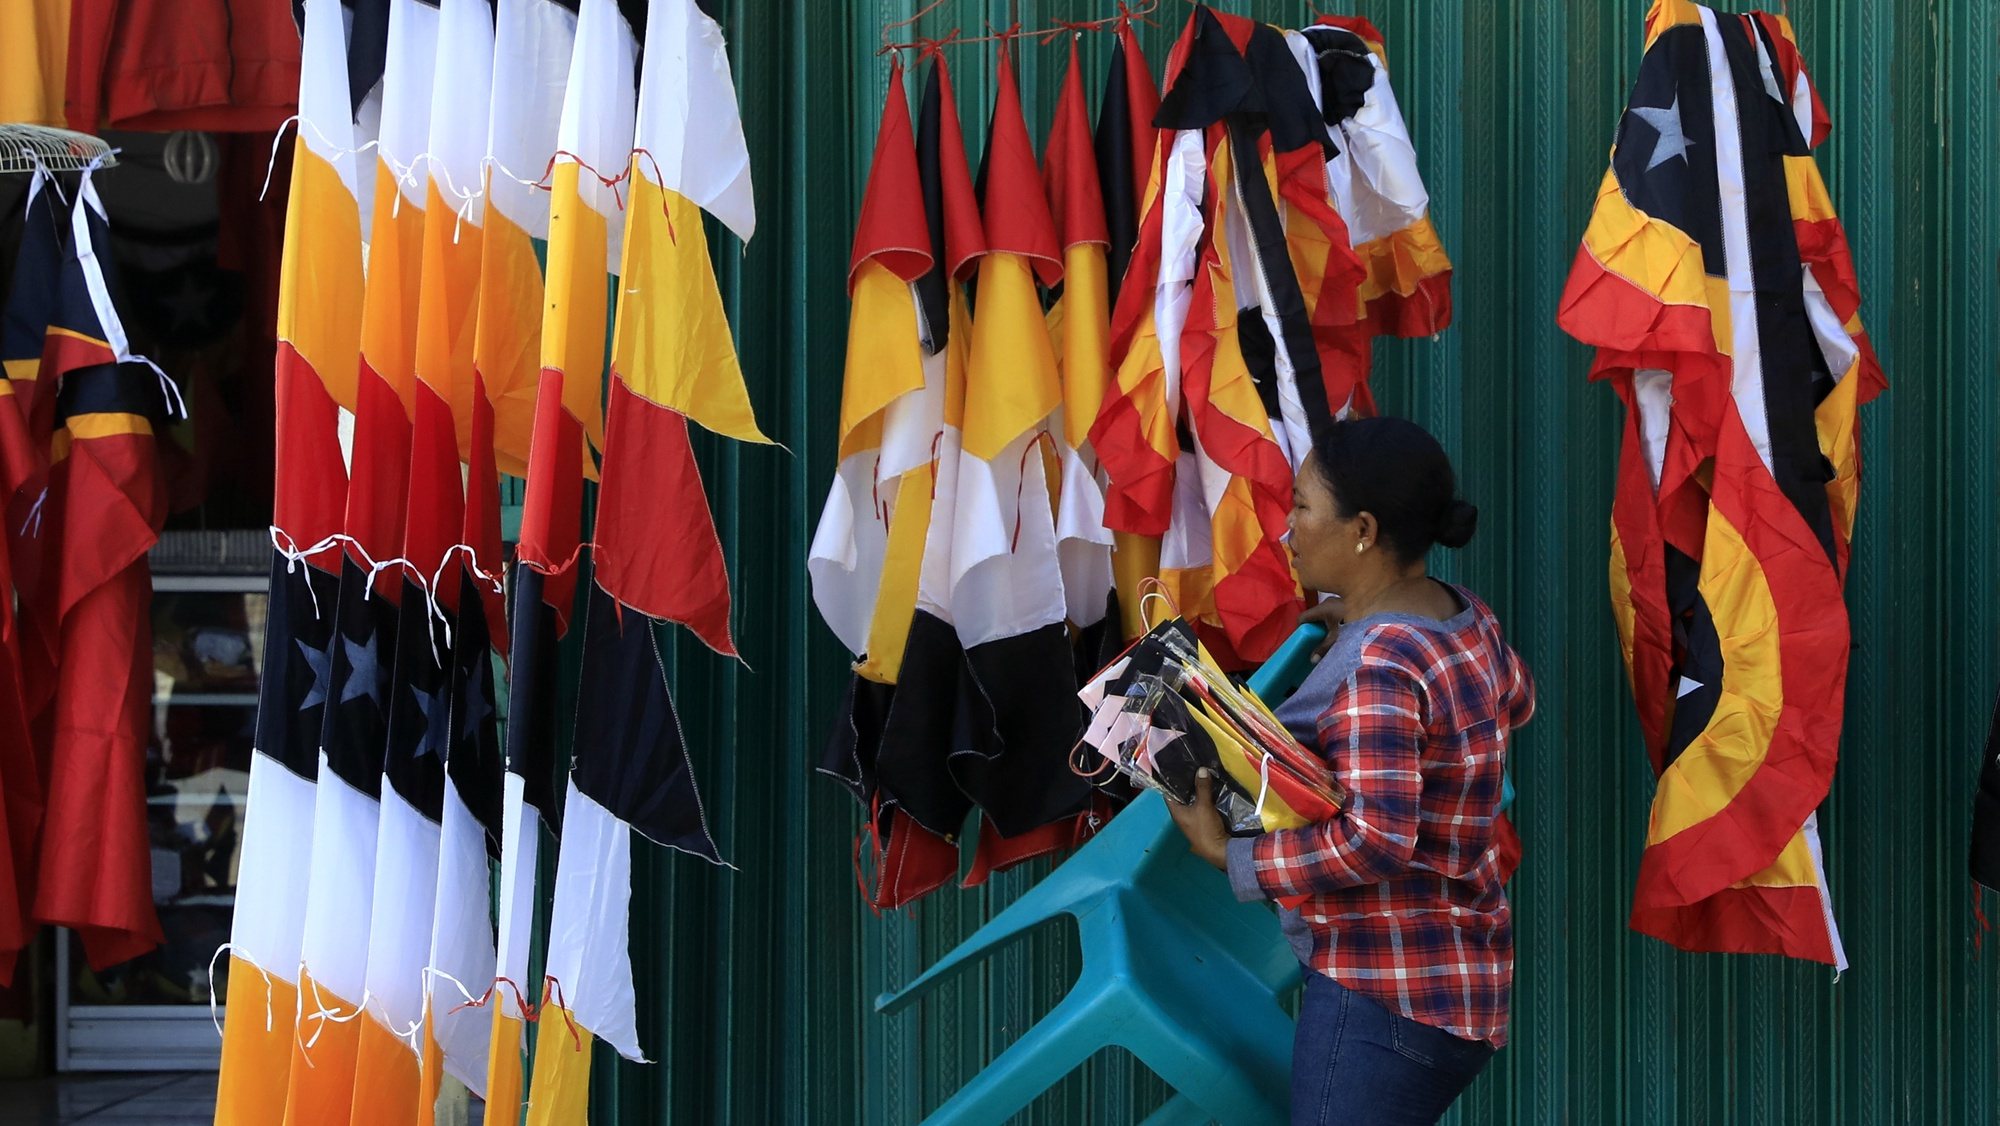 epa08842968 A vendor arranges flags as she waits for customers on the street side in Dili, East Timor, also known as Timor Leste, 26 November 2020.  EPA/ANTONIO DASIPARU